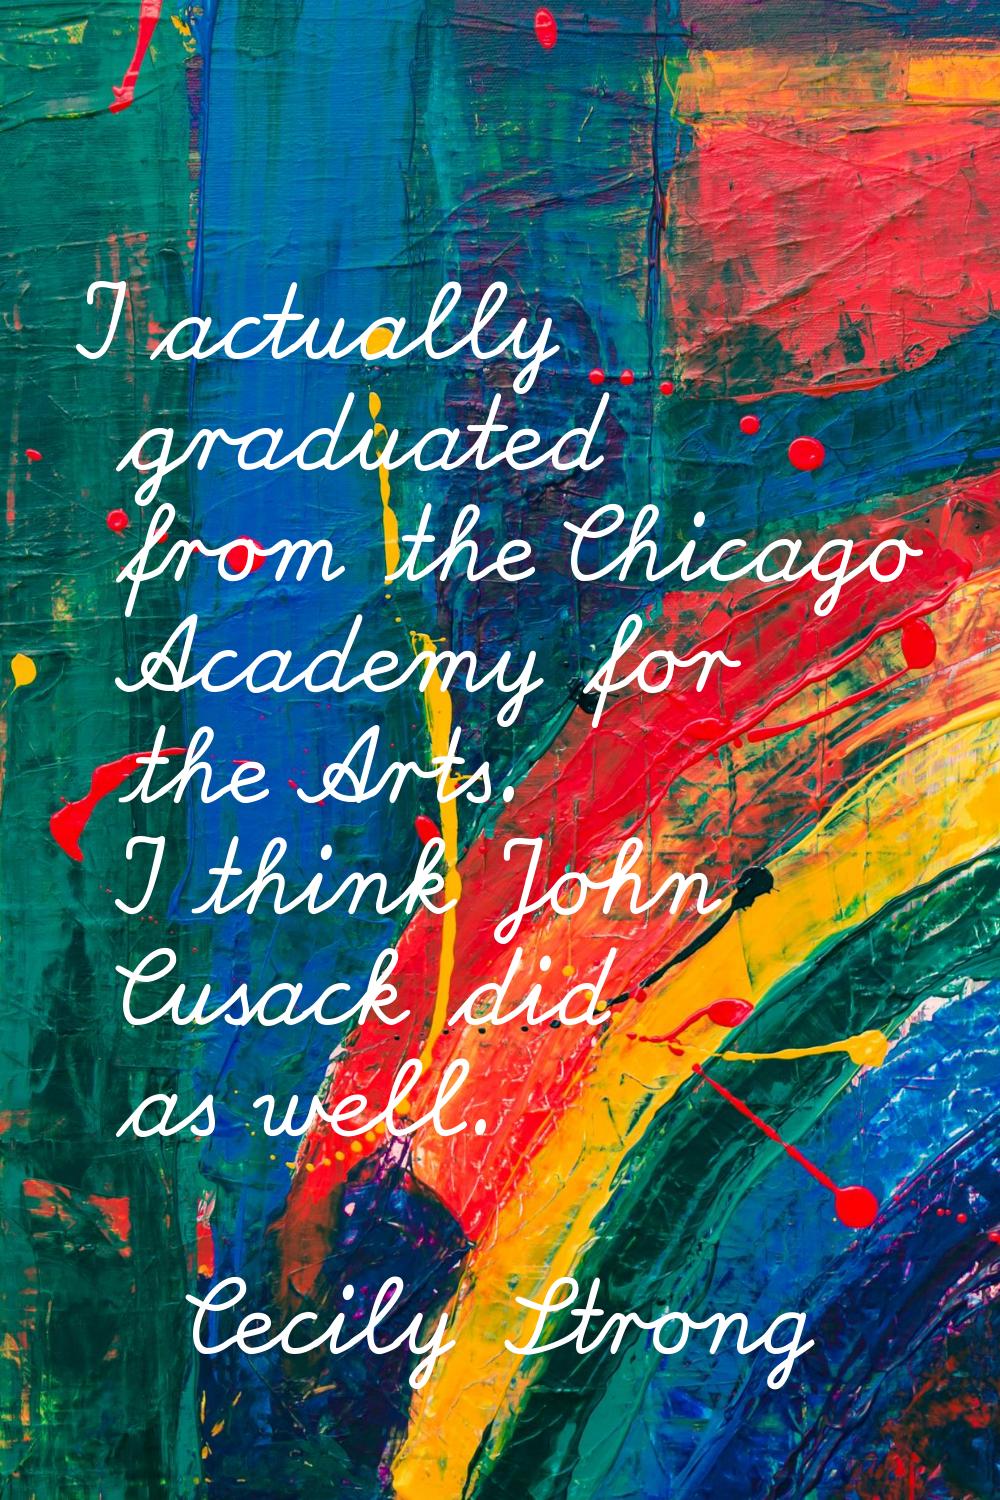 I actually graduated from the Chicago Academy for the Arts. I think John Cusack did as well.